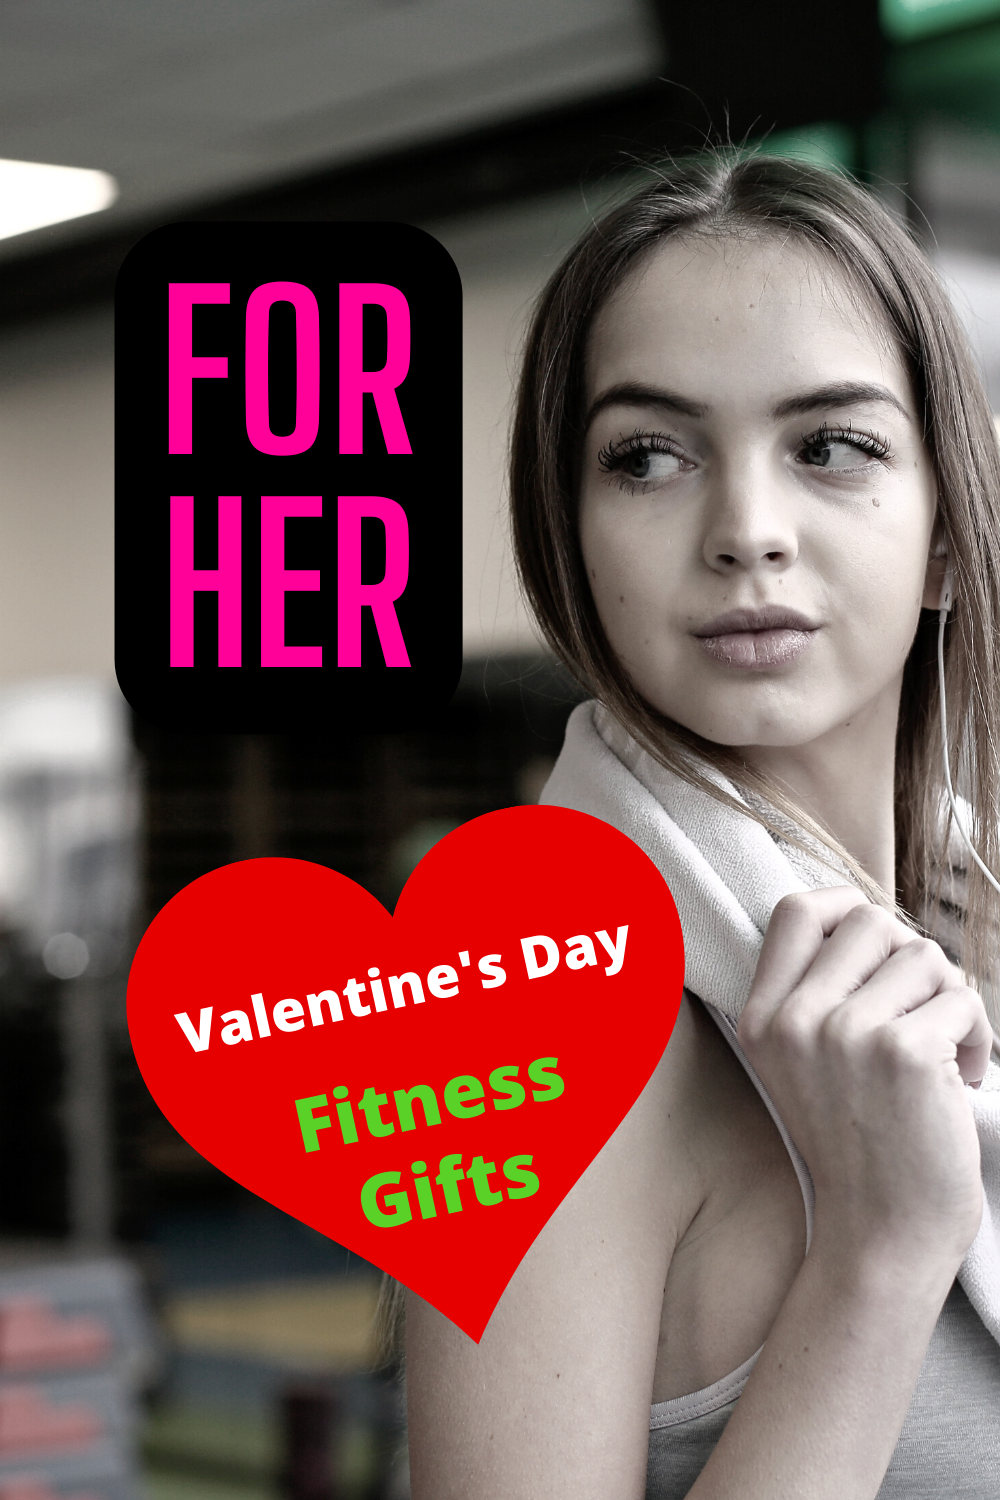 Unique Valentine's Day Gifts for your fit woman!